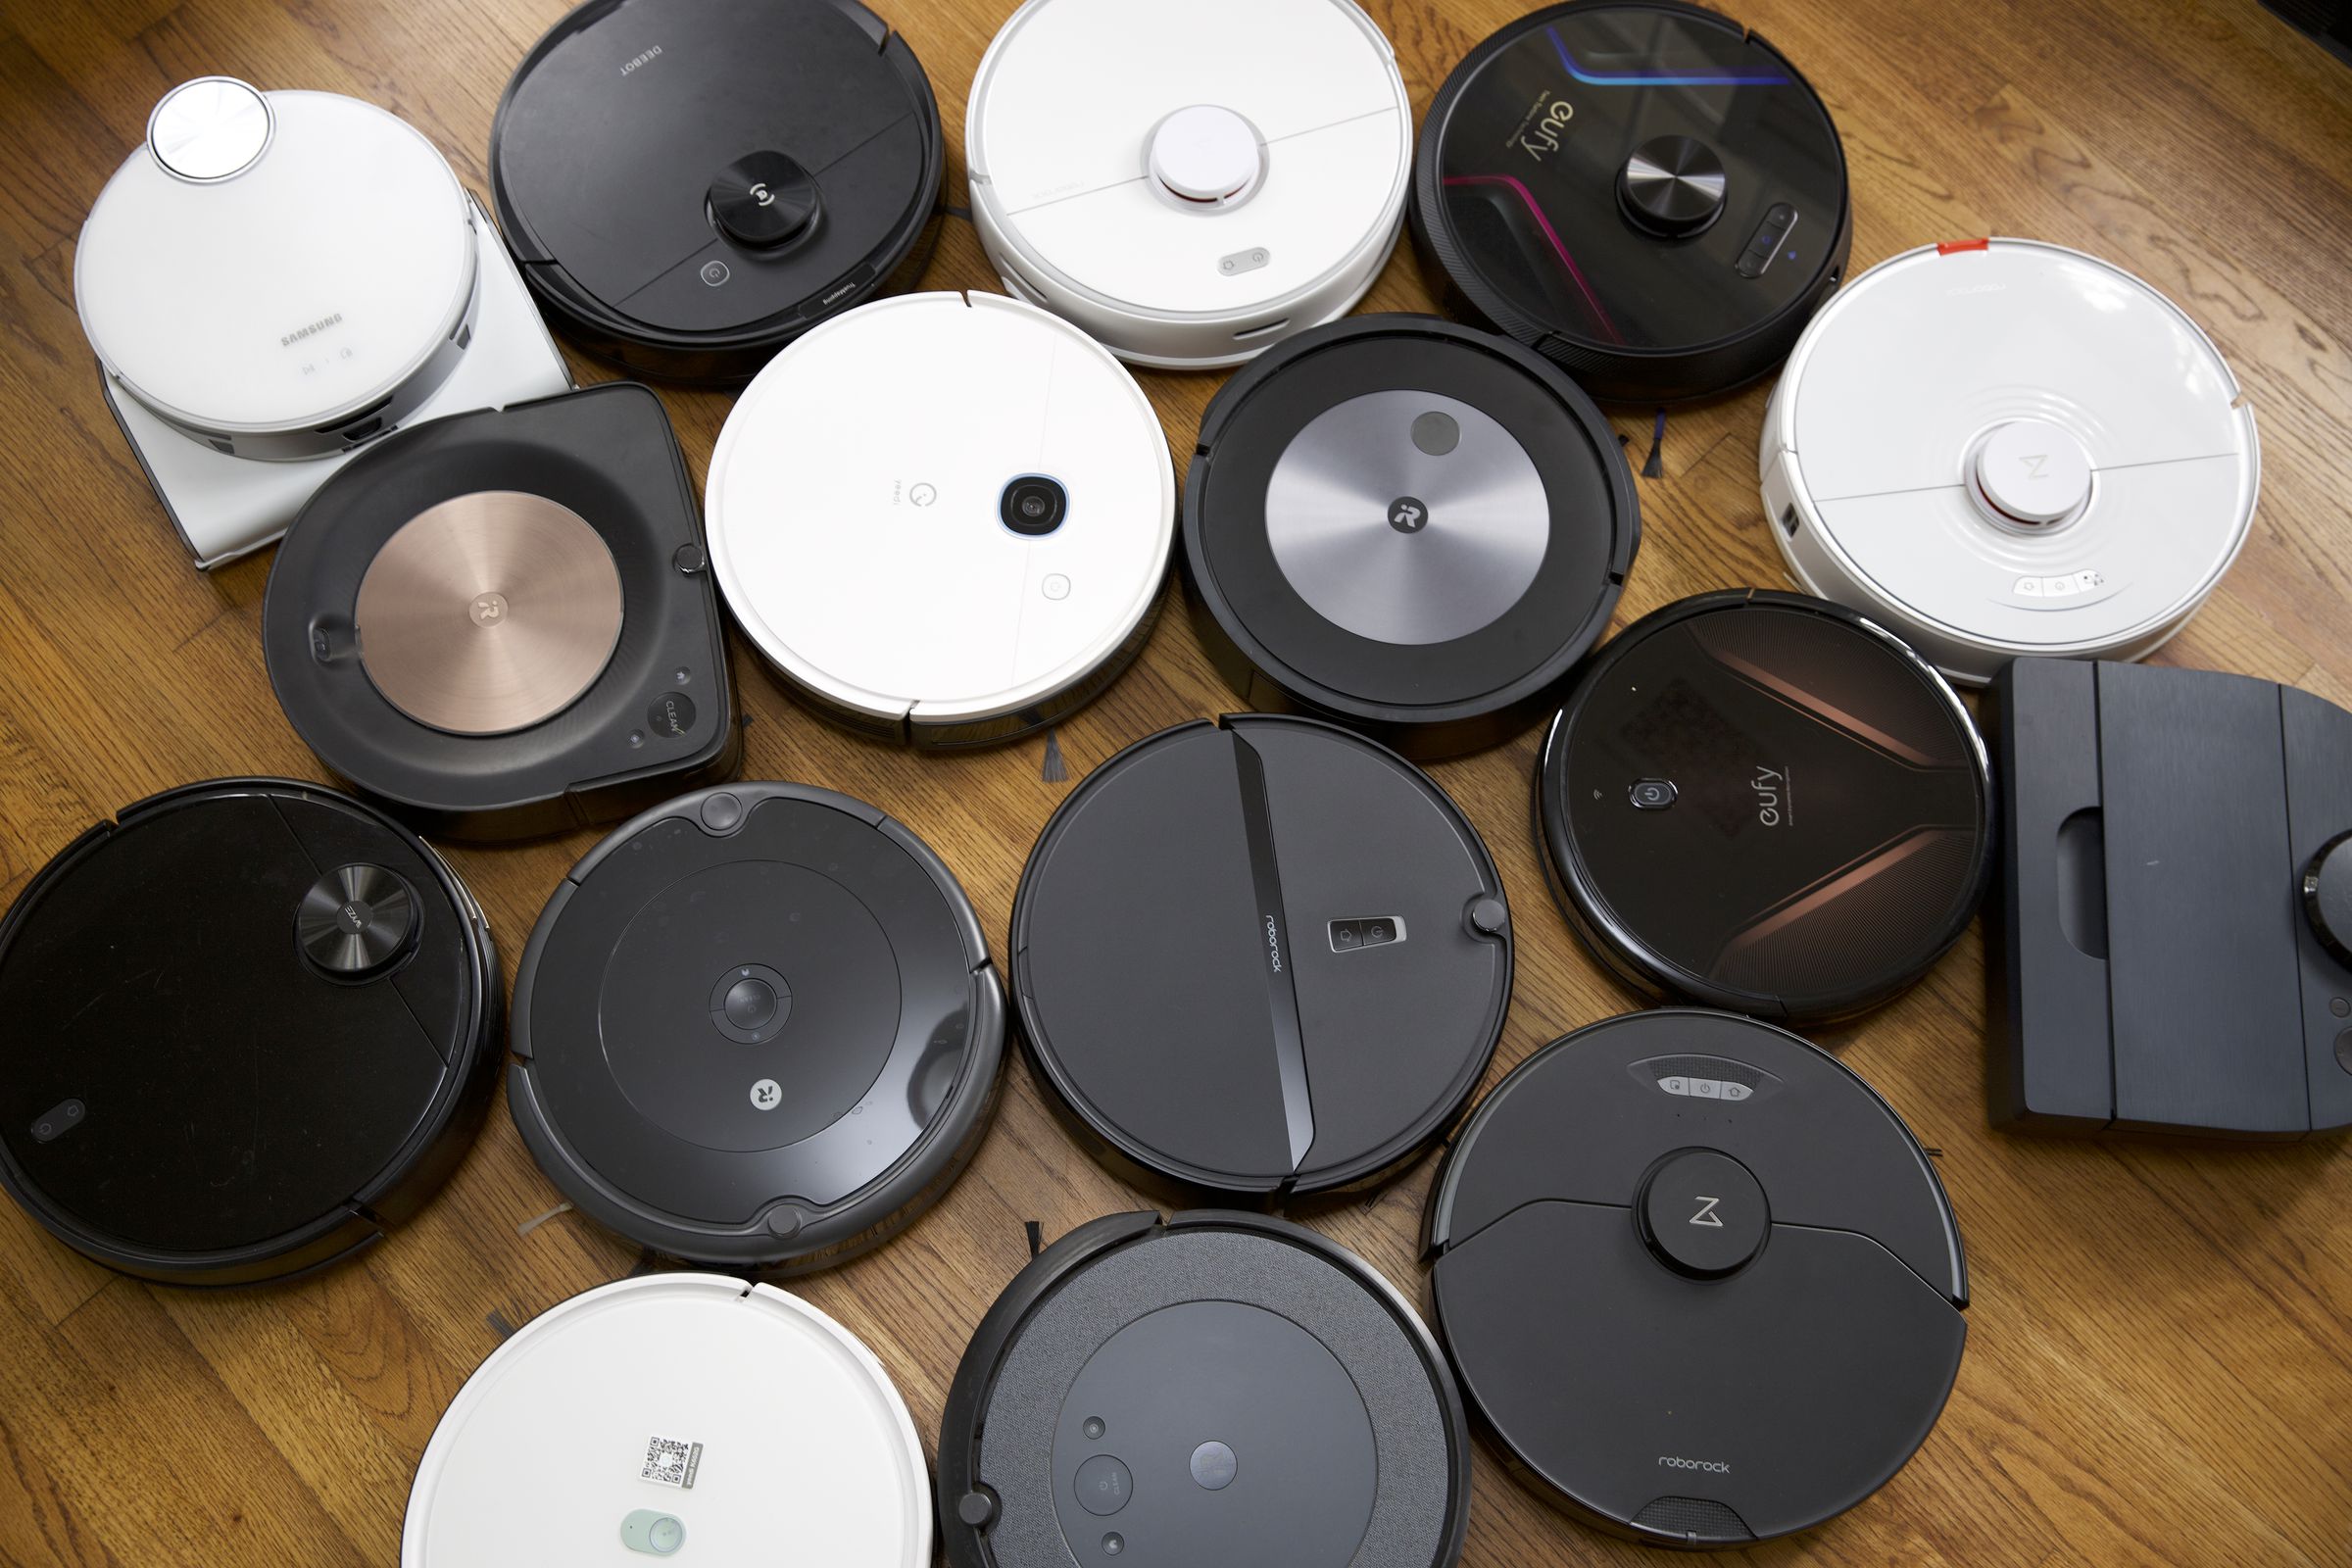 There are a lot of robot vacuums available today, and I’ve tested most of them.